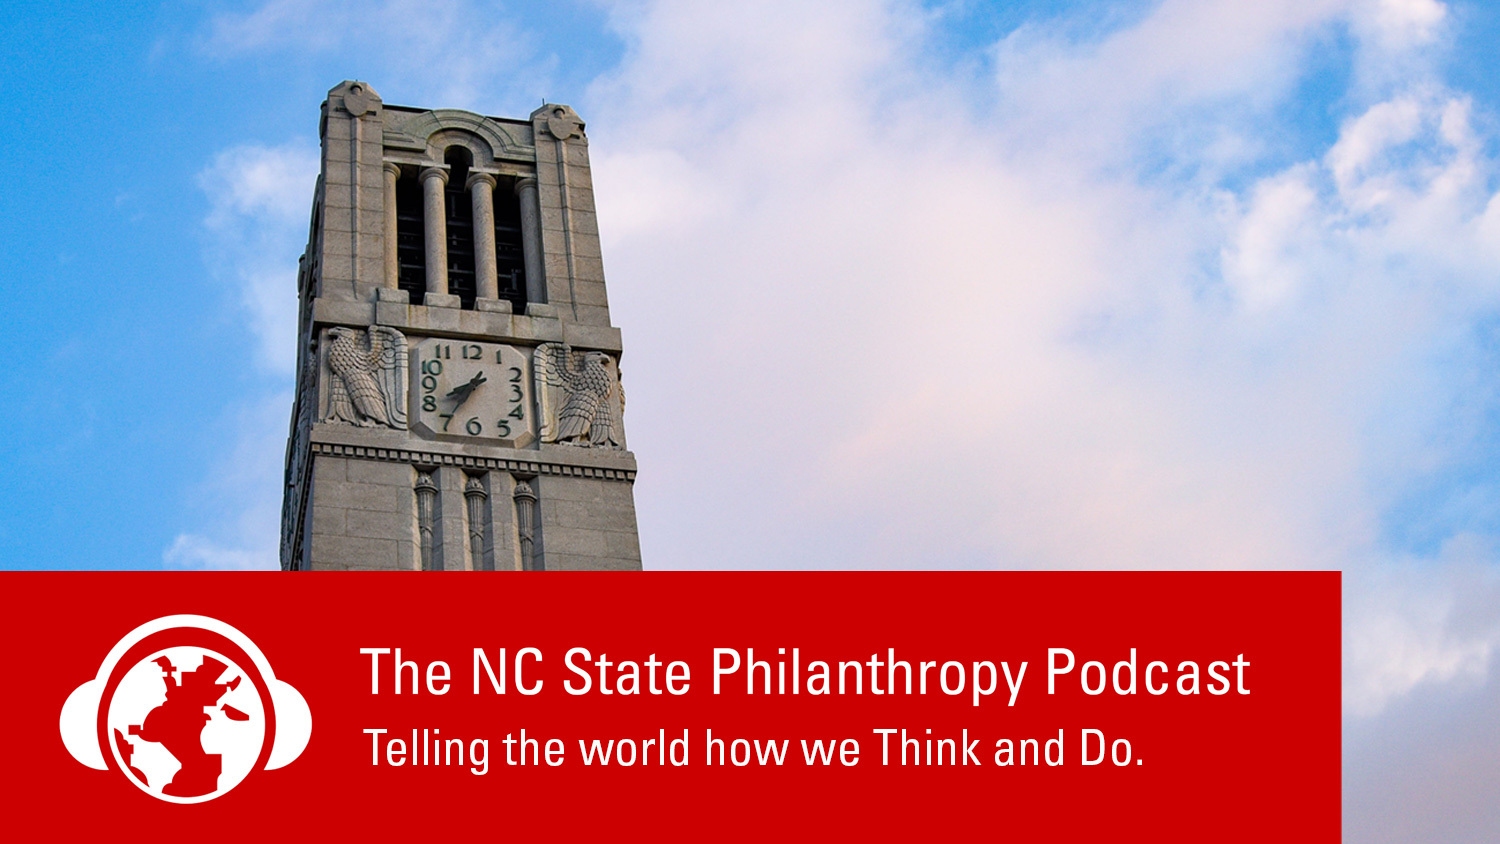 belltower with NC State philanthropy podcast logo